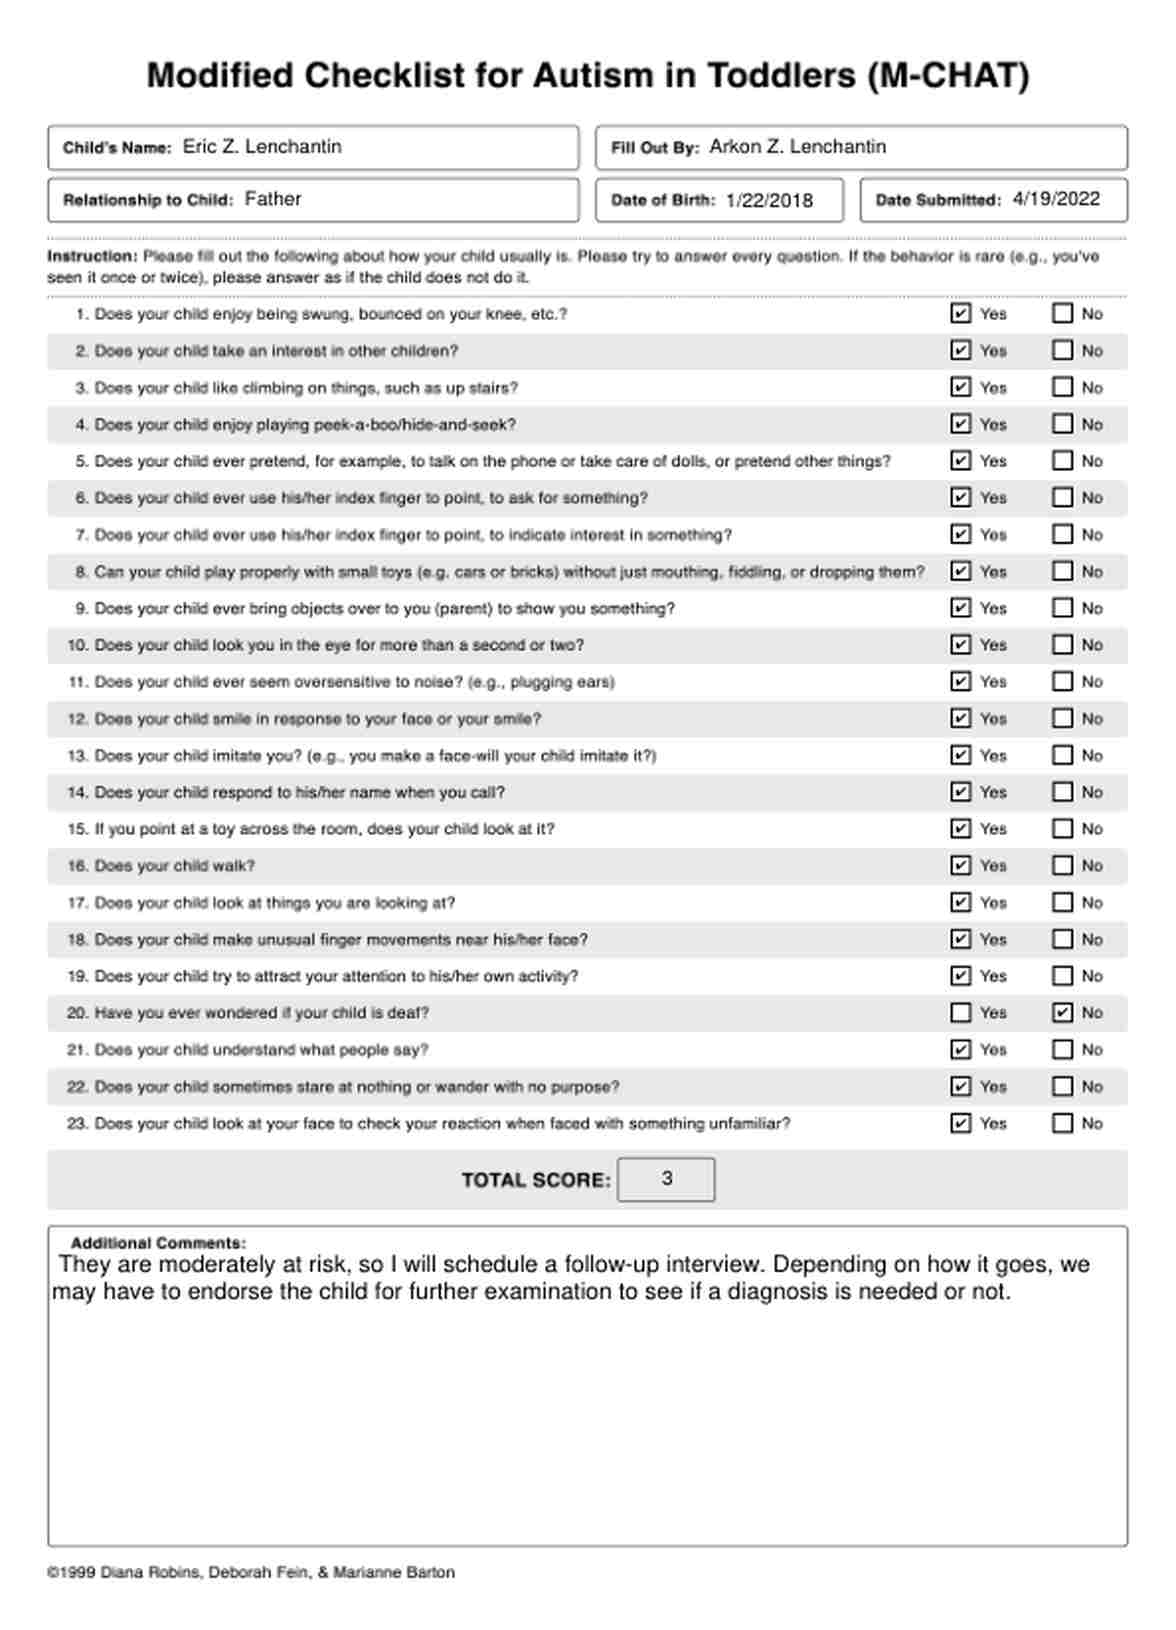 Modified Checklist for Autism in Toddlers (M-CHAT) PDF Example